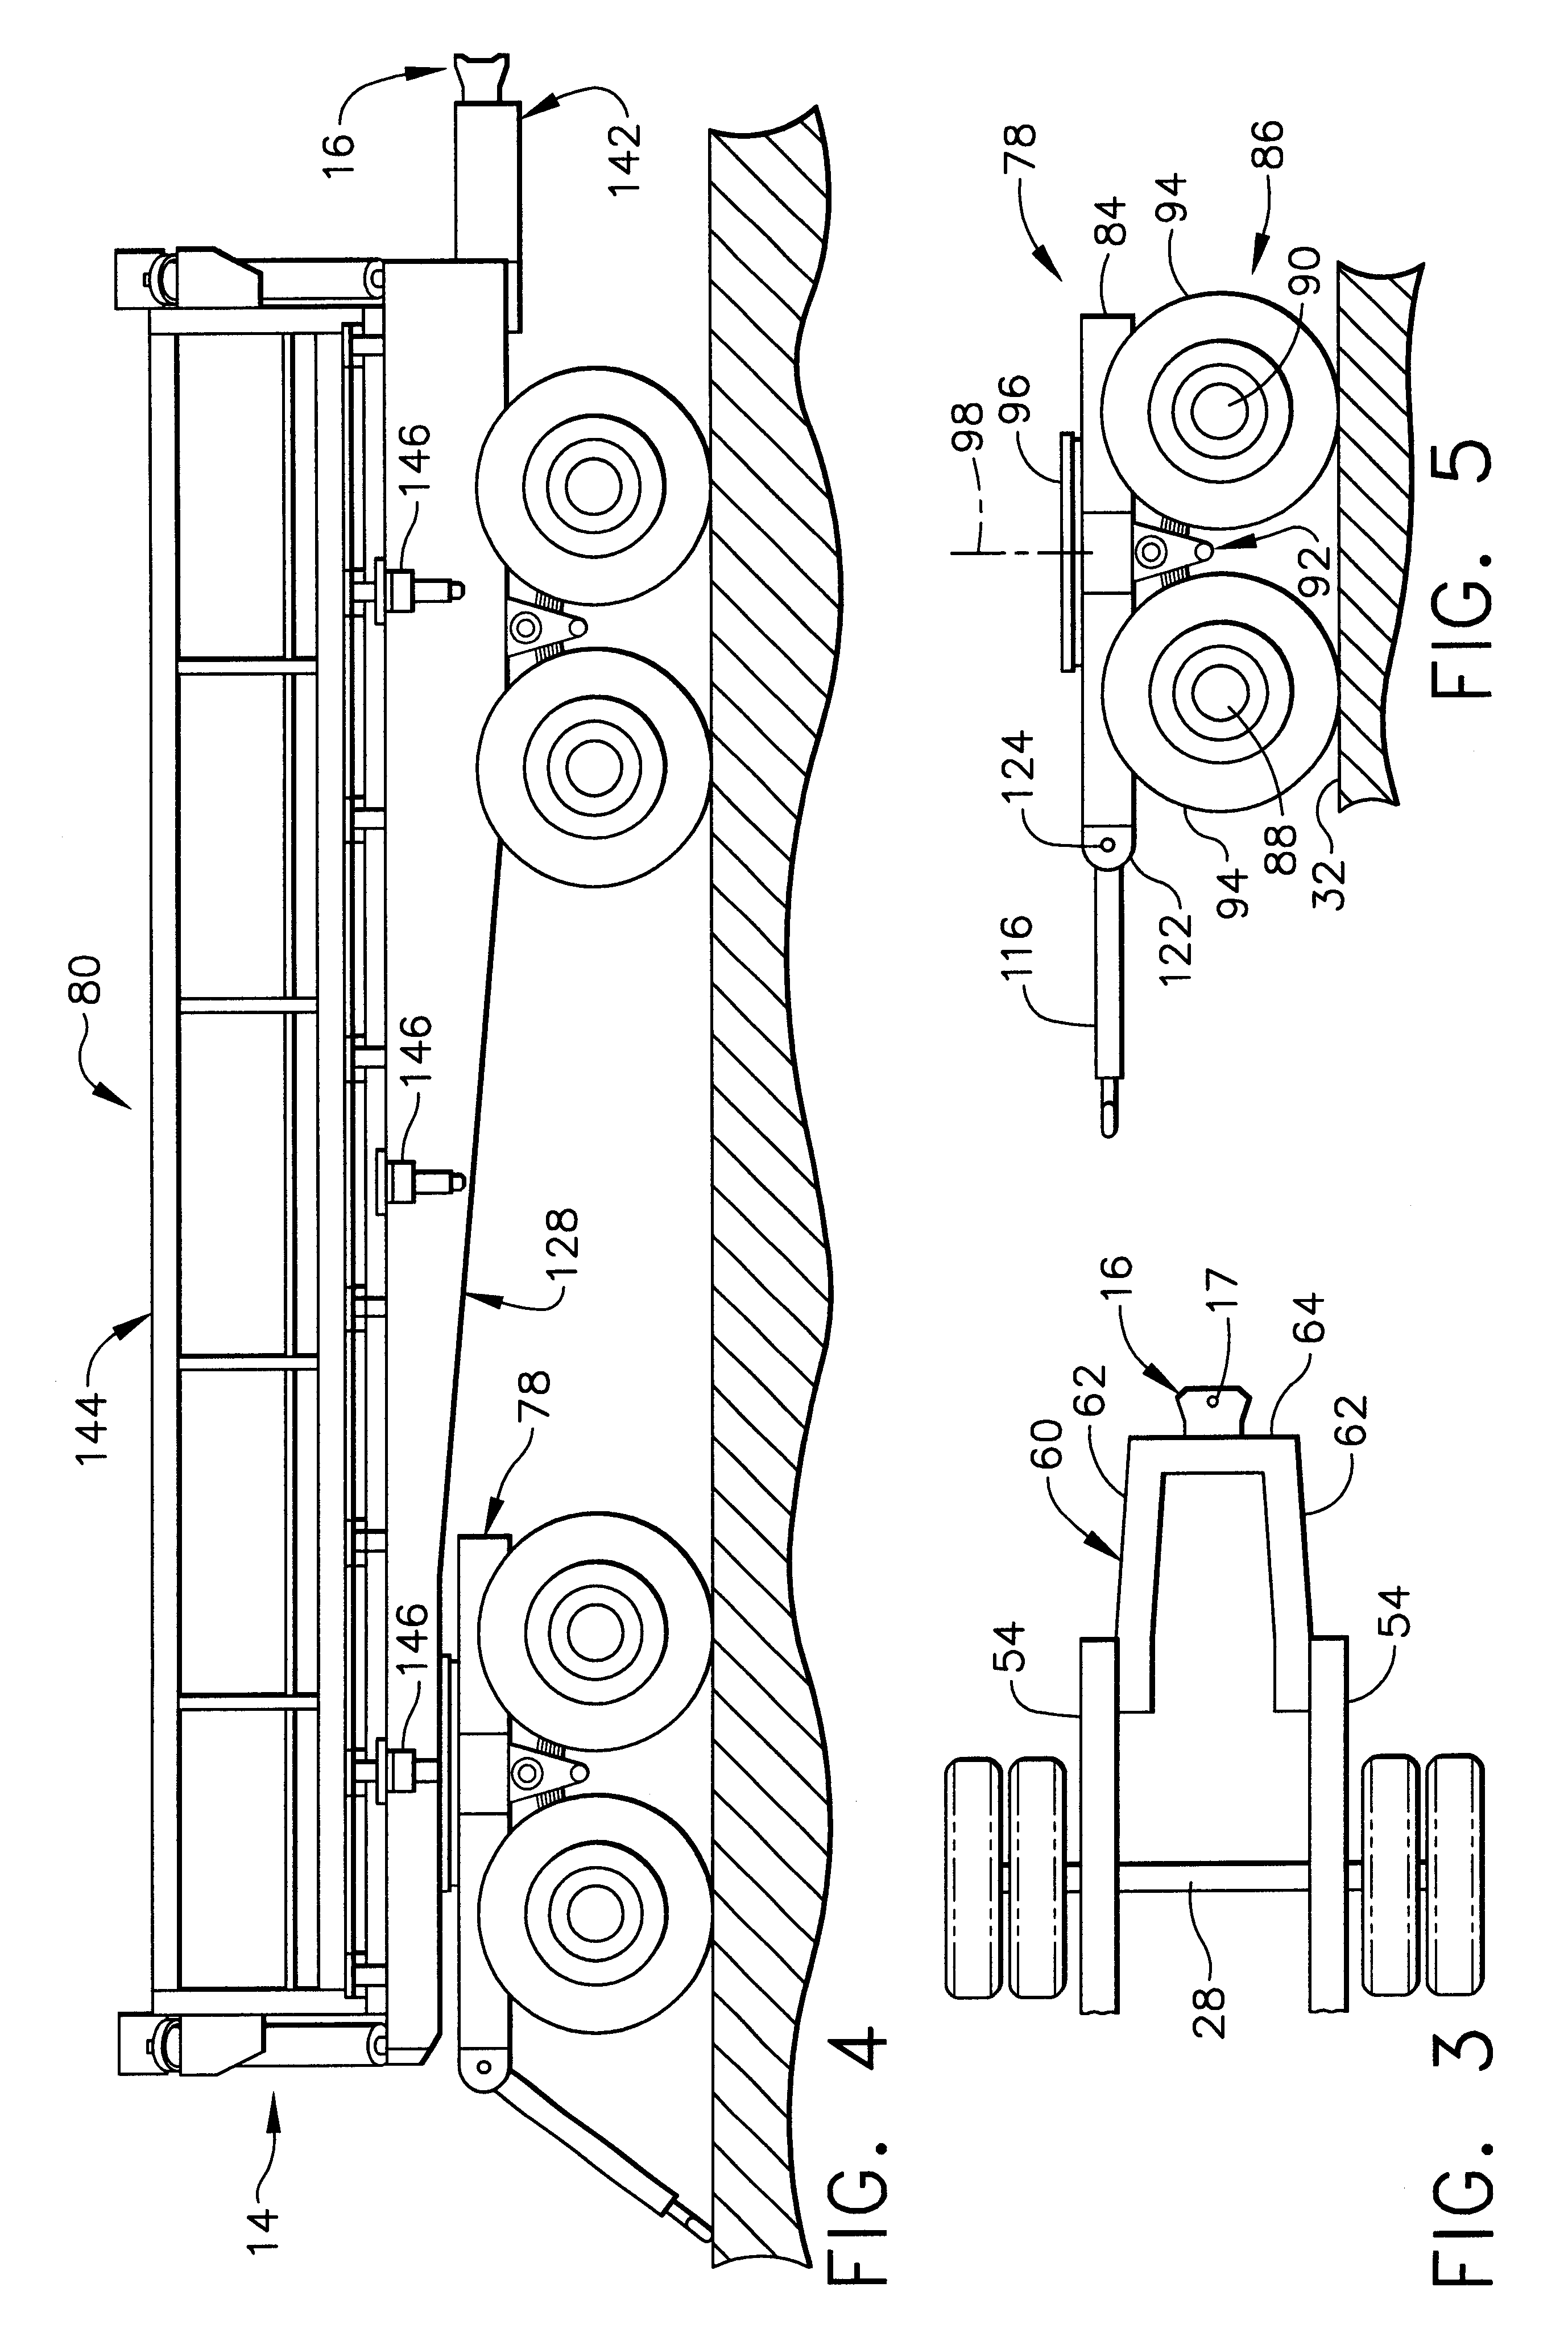 Multicombination vehicle and method for transporting a payload in an underground mine